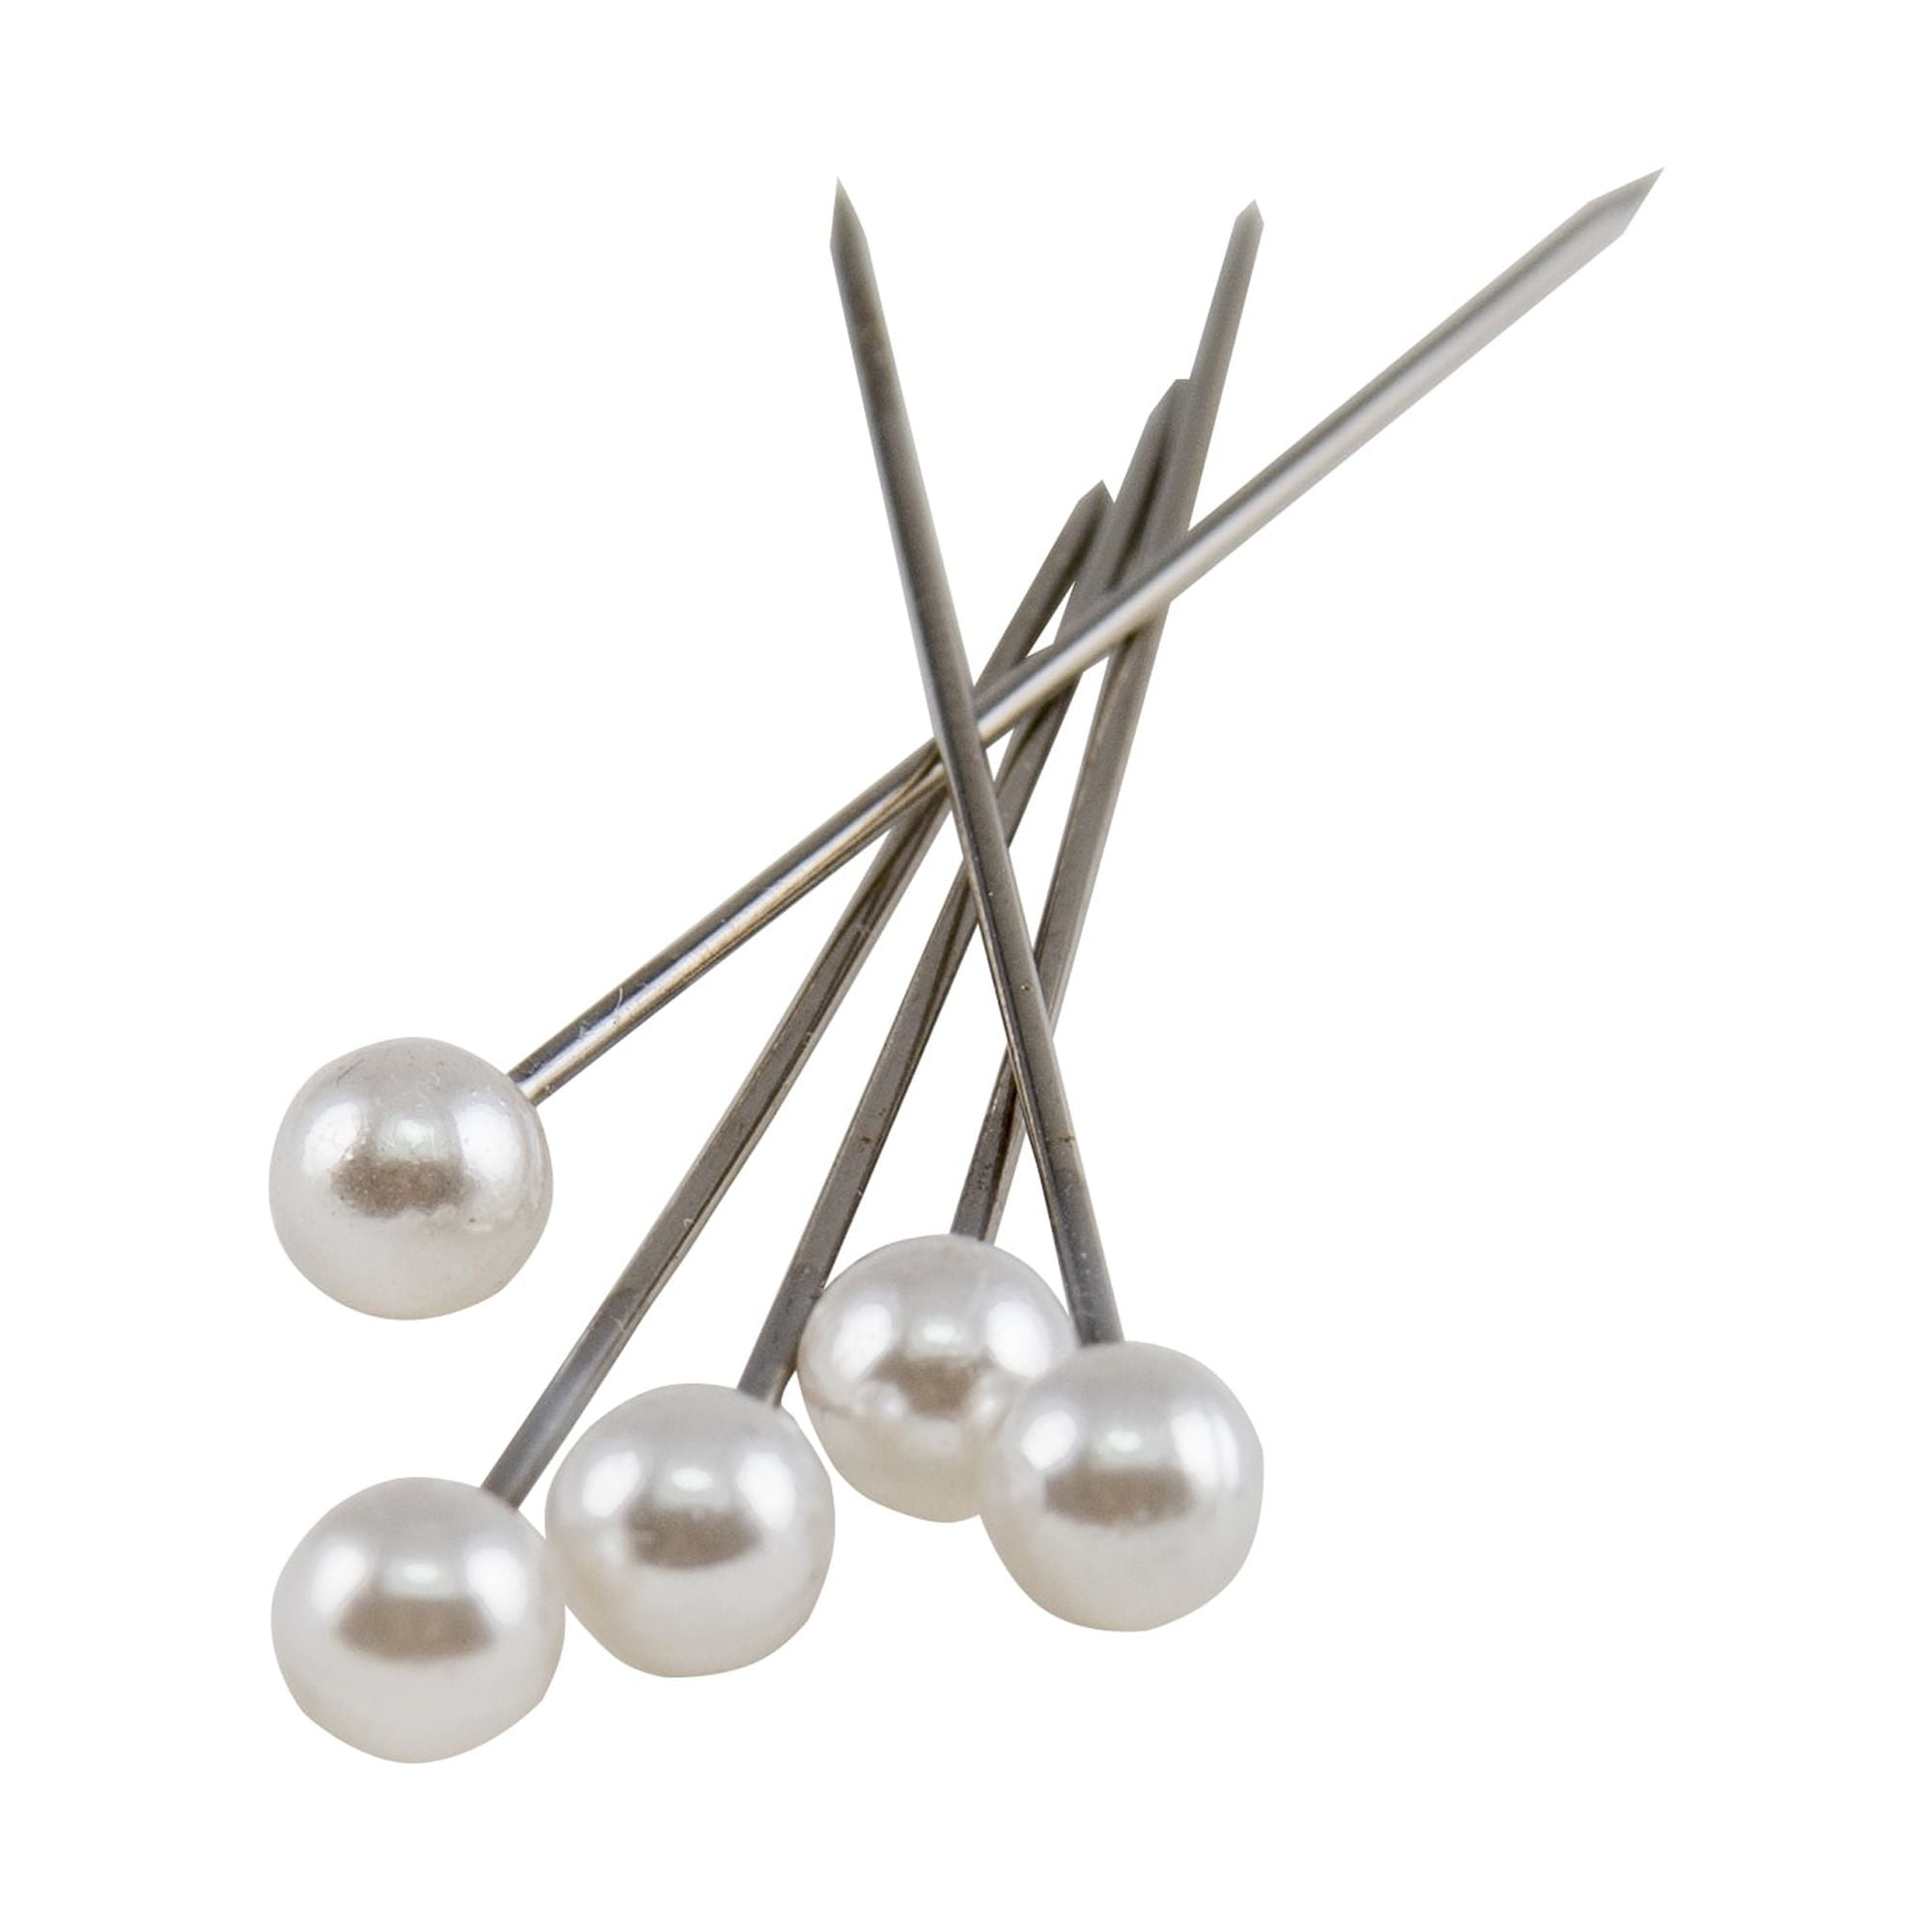 Bead Head Straight Pins Stock Photo - Download Image Now